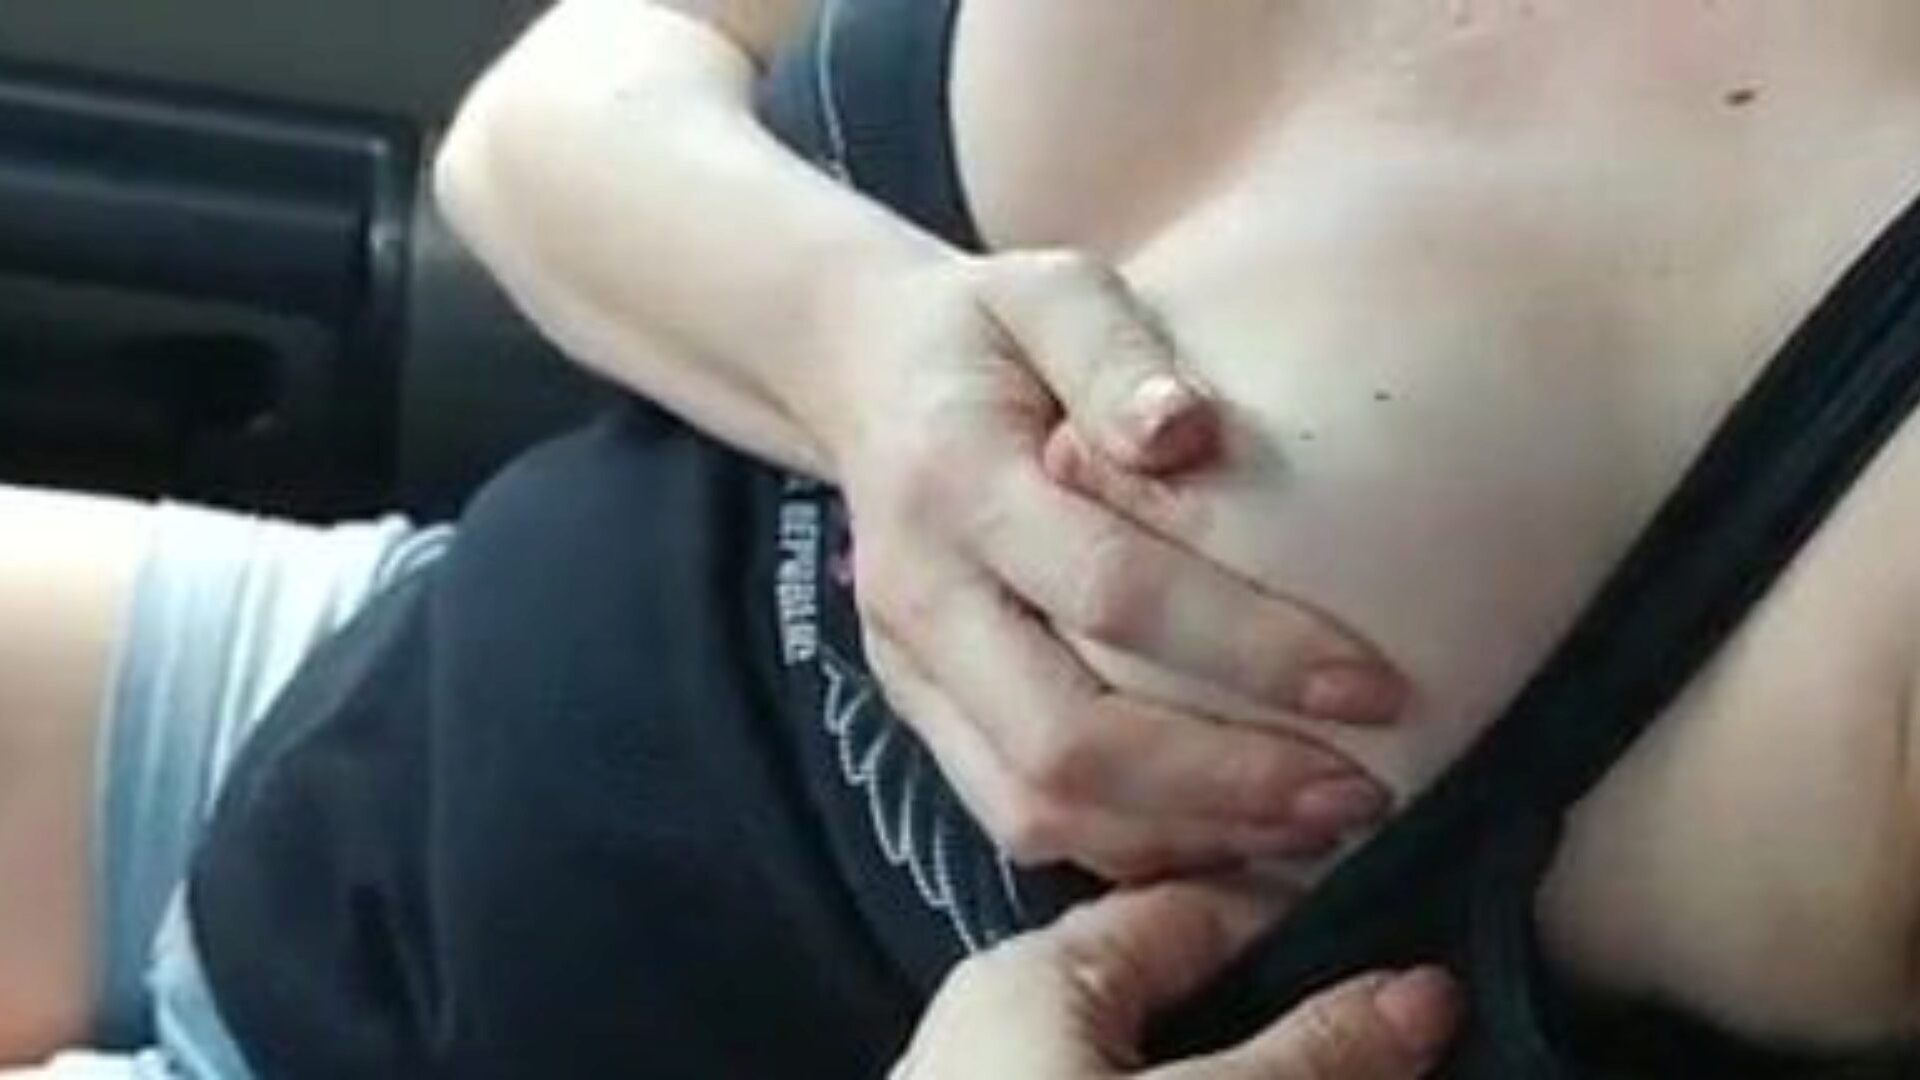 Horny Mom in Car Needs to Fuck, Free Mobile Mom Porn Video Watch Horny Mom in Car Needs to Fuck clip on xHamster, the best lovemaking tube web resource with tons of free Mobile Mom Free Beeg Mom & Xxx Mom pornography videos